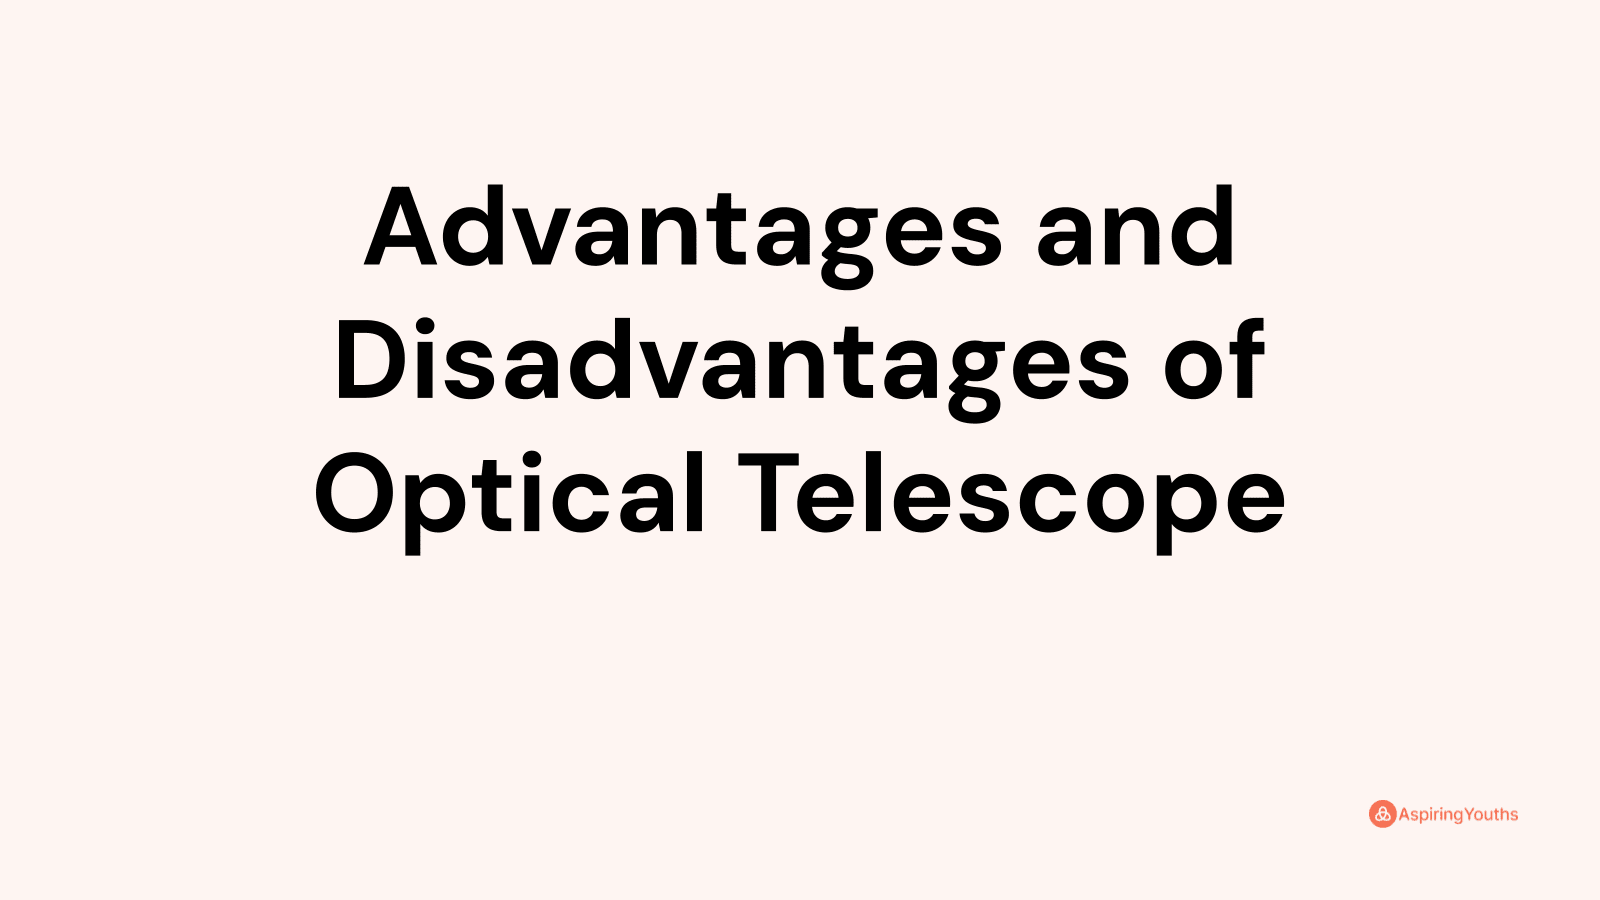 Advantages and disadvantages of Optical Telescope